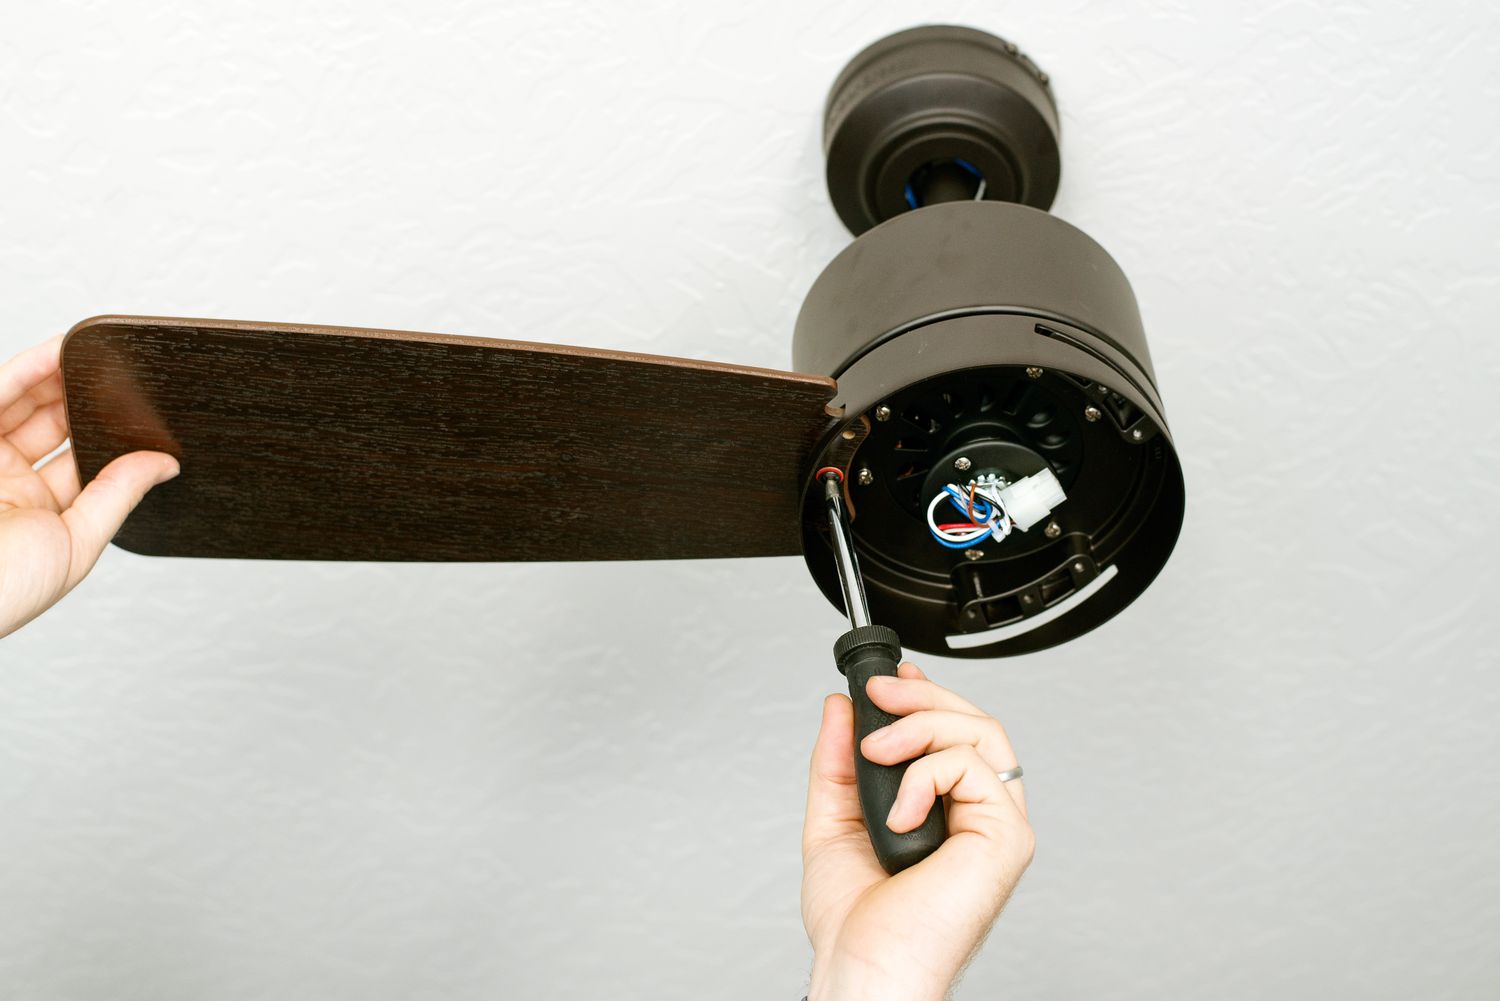 Ceiling fan blades attached to fan motor assembly with screwdriver